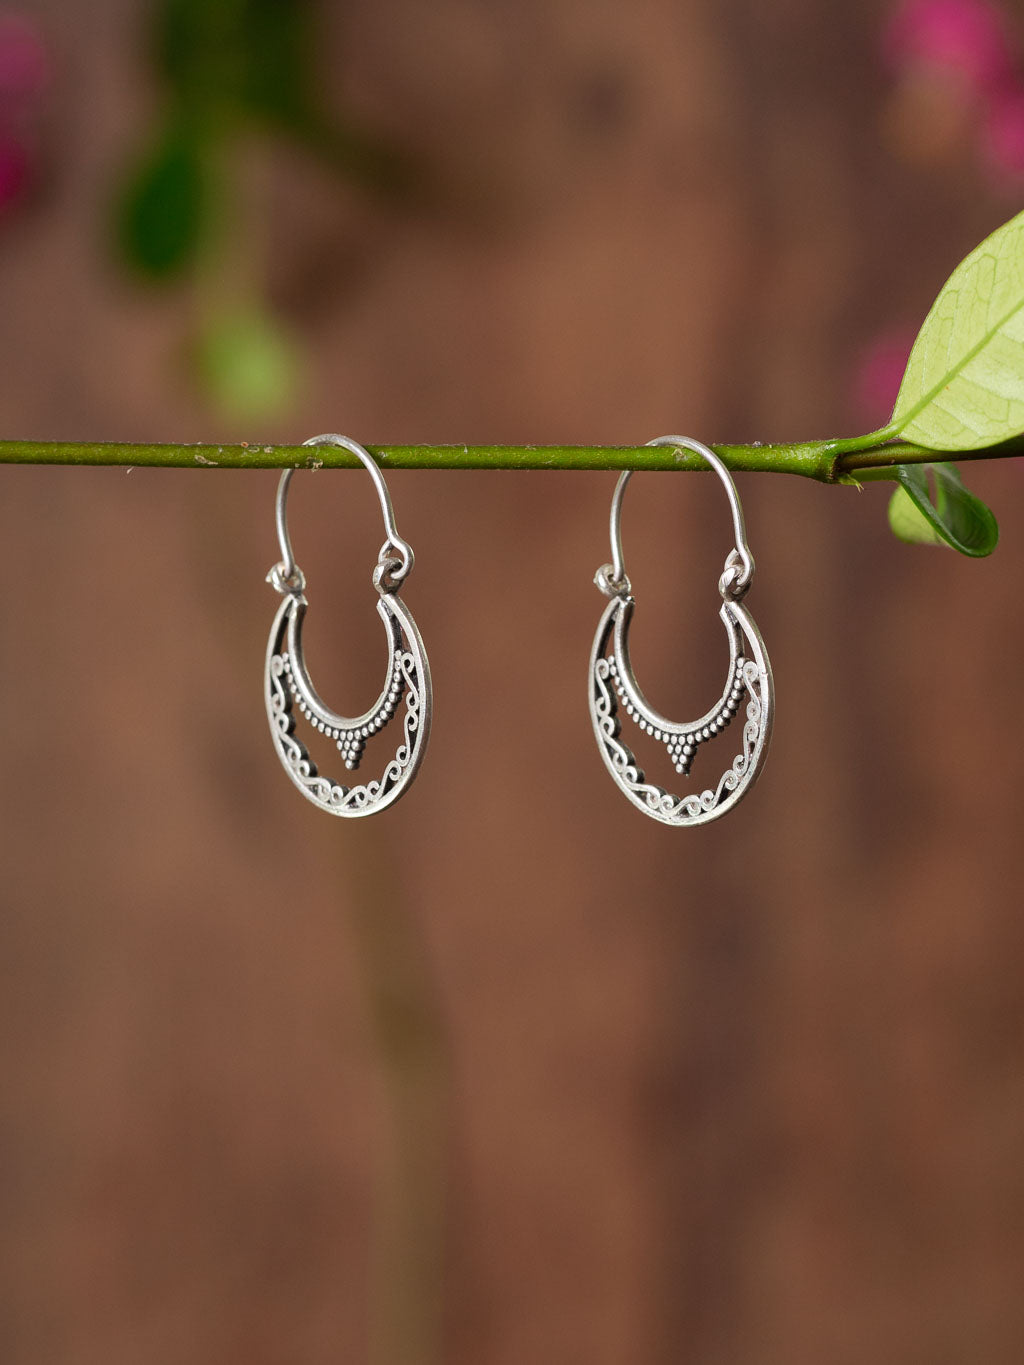 Lunar Earring - Silver clasp earring in a lacey crescent moon shape.